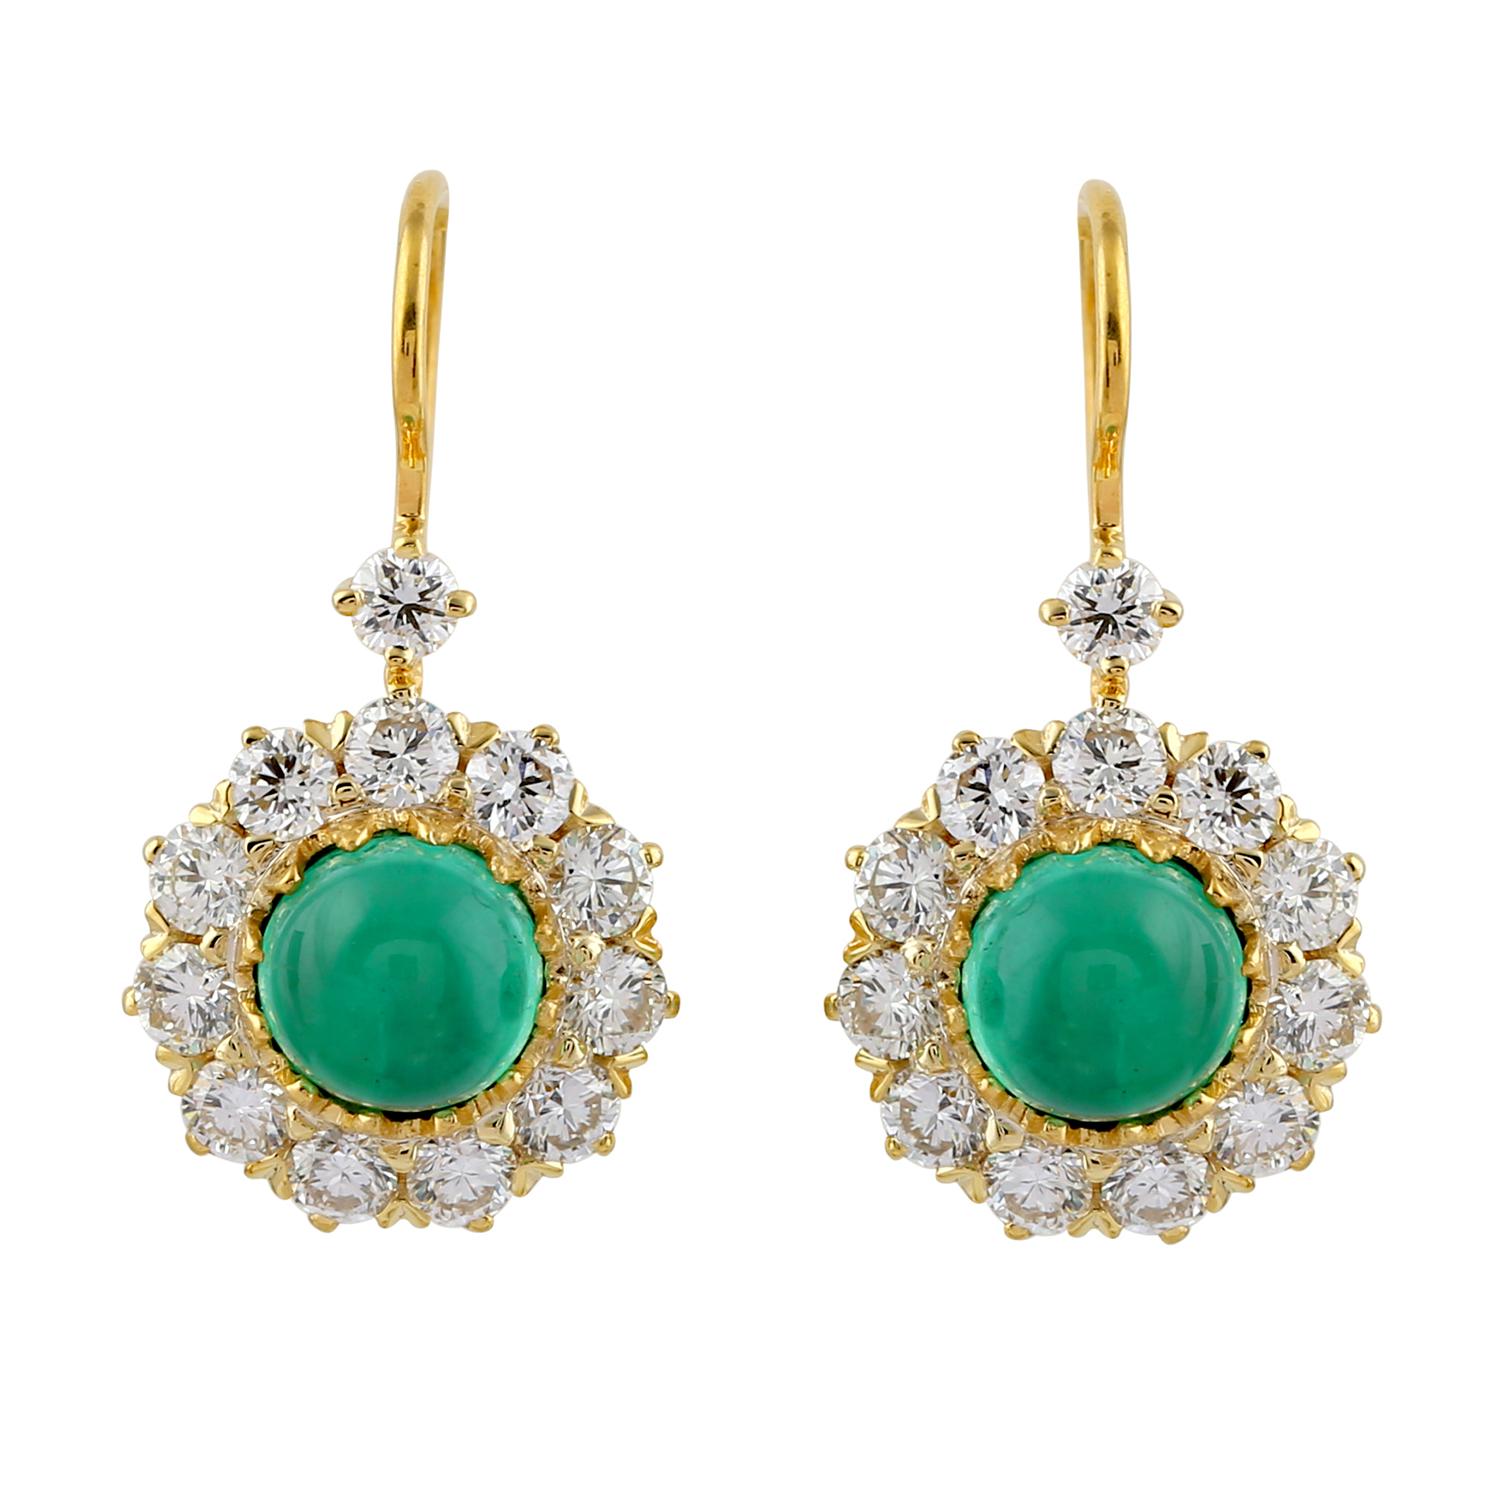 This Classic Cabochon round Emerald and diamond drop earrings in 18K Yellow Gold is sassy yet everyday wear for emerald lovers.

18KT: 6.034gms
Diamond: 1.86cts
Emerald: 3.26cts